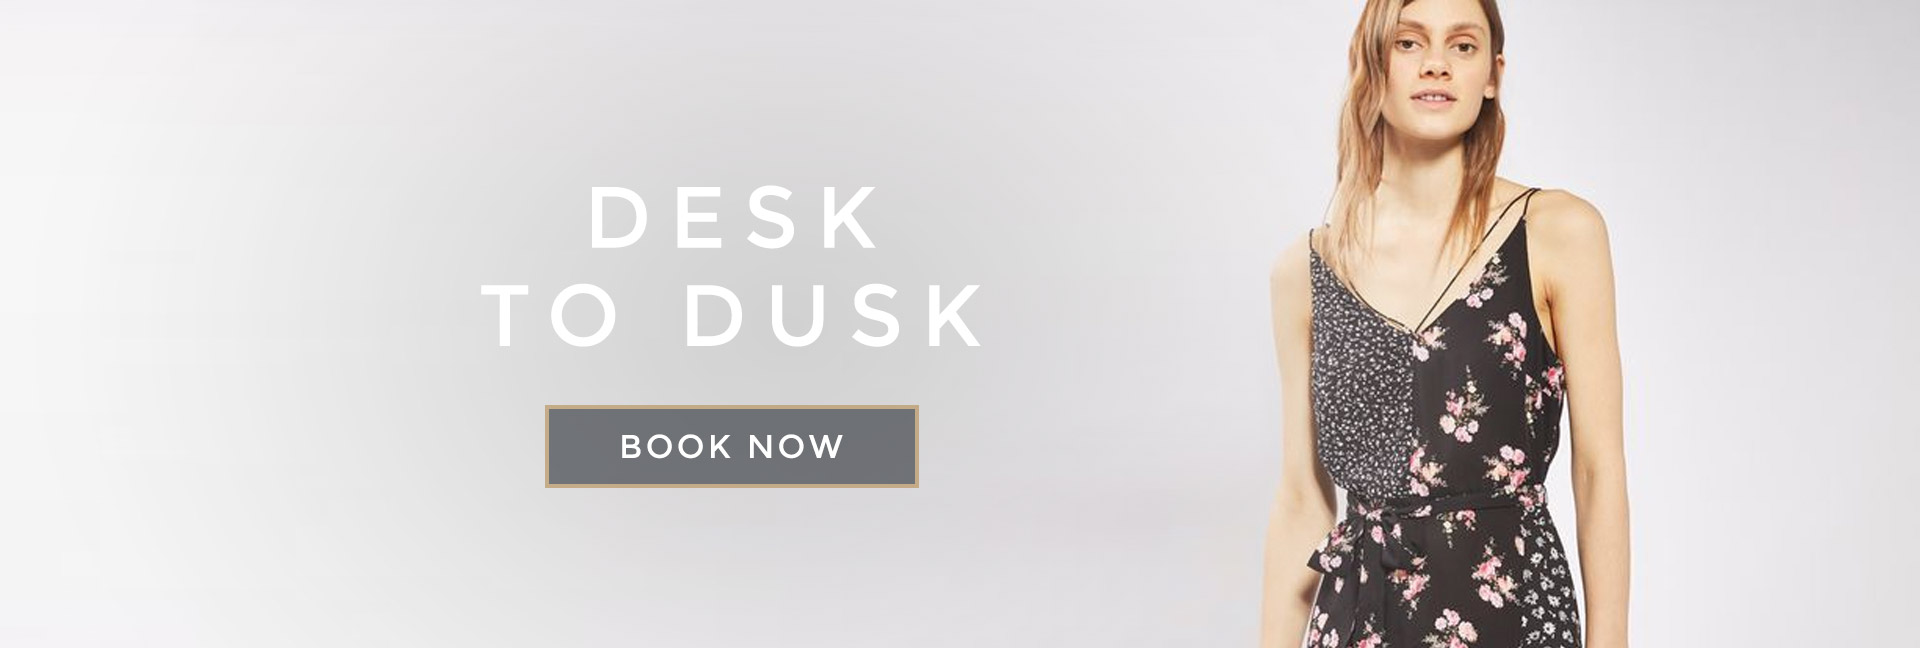 Desk to Dusk at All Bar One Stratford Upon Avon - Book your table